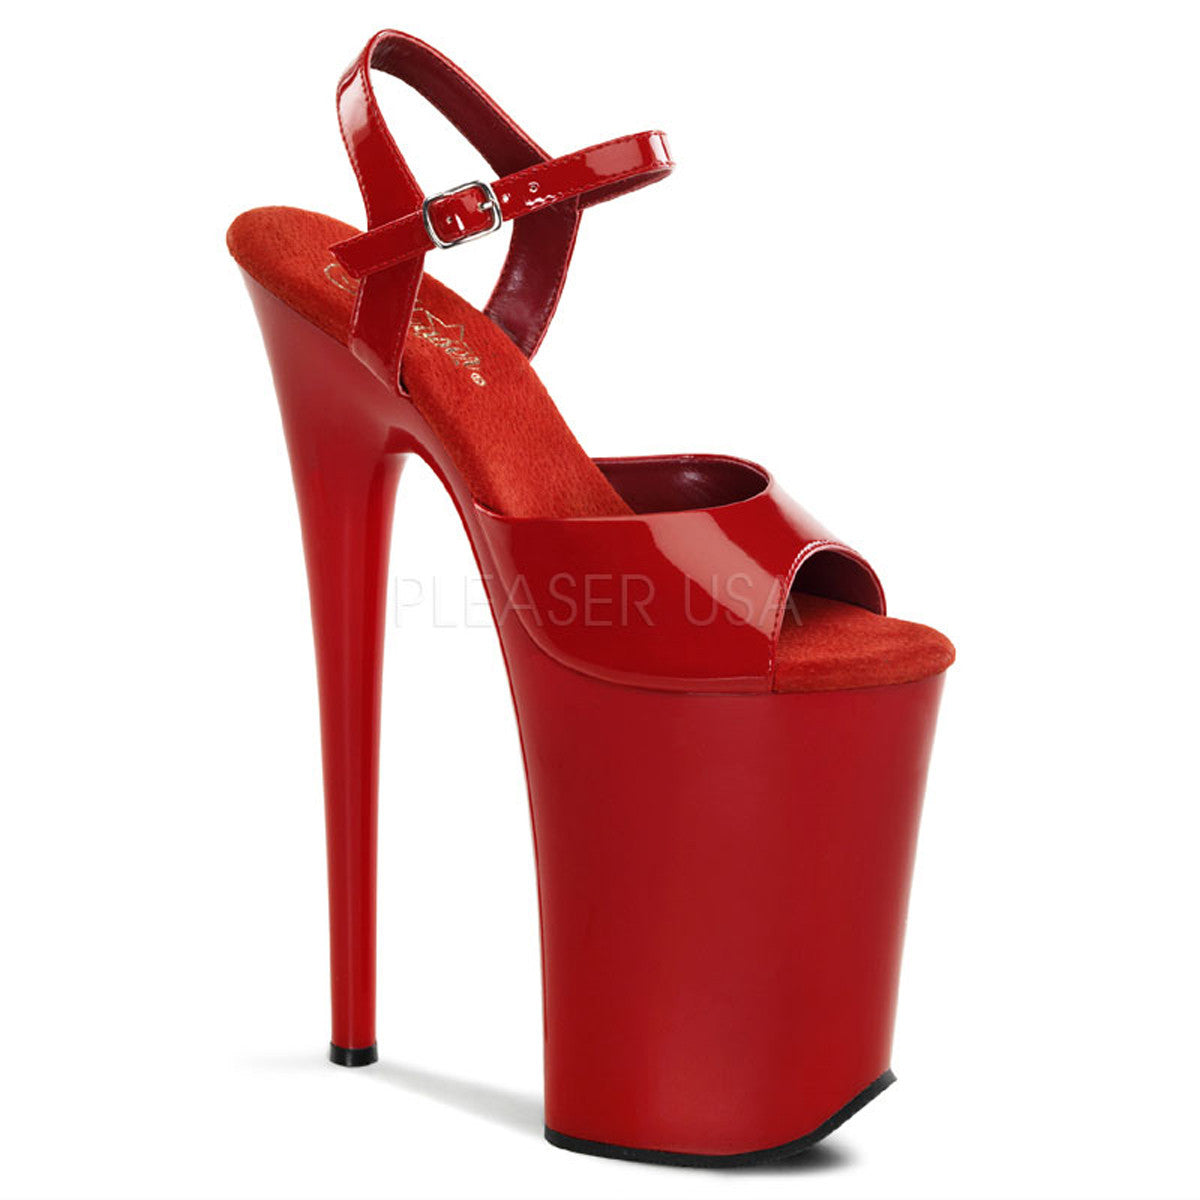 PLEASER INFINITY-909 Red 9 Inch Heel Ankle Strap Sandals - Shoecup.com